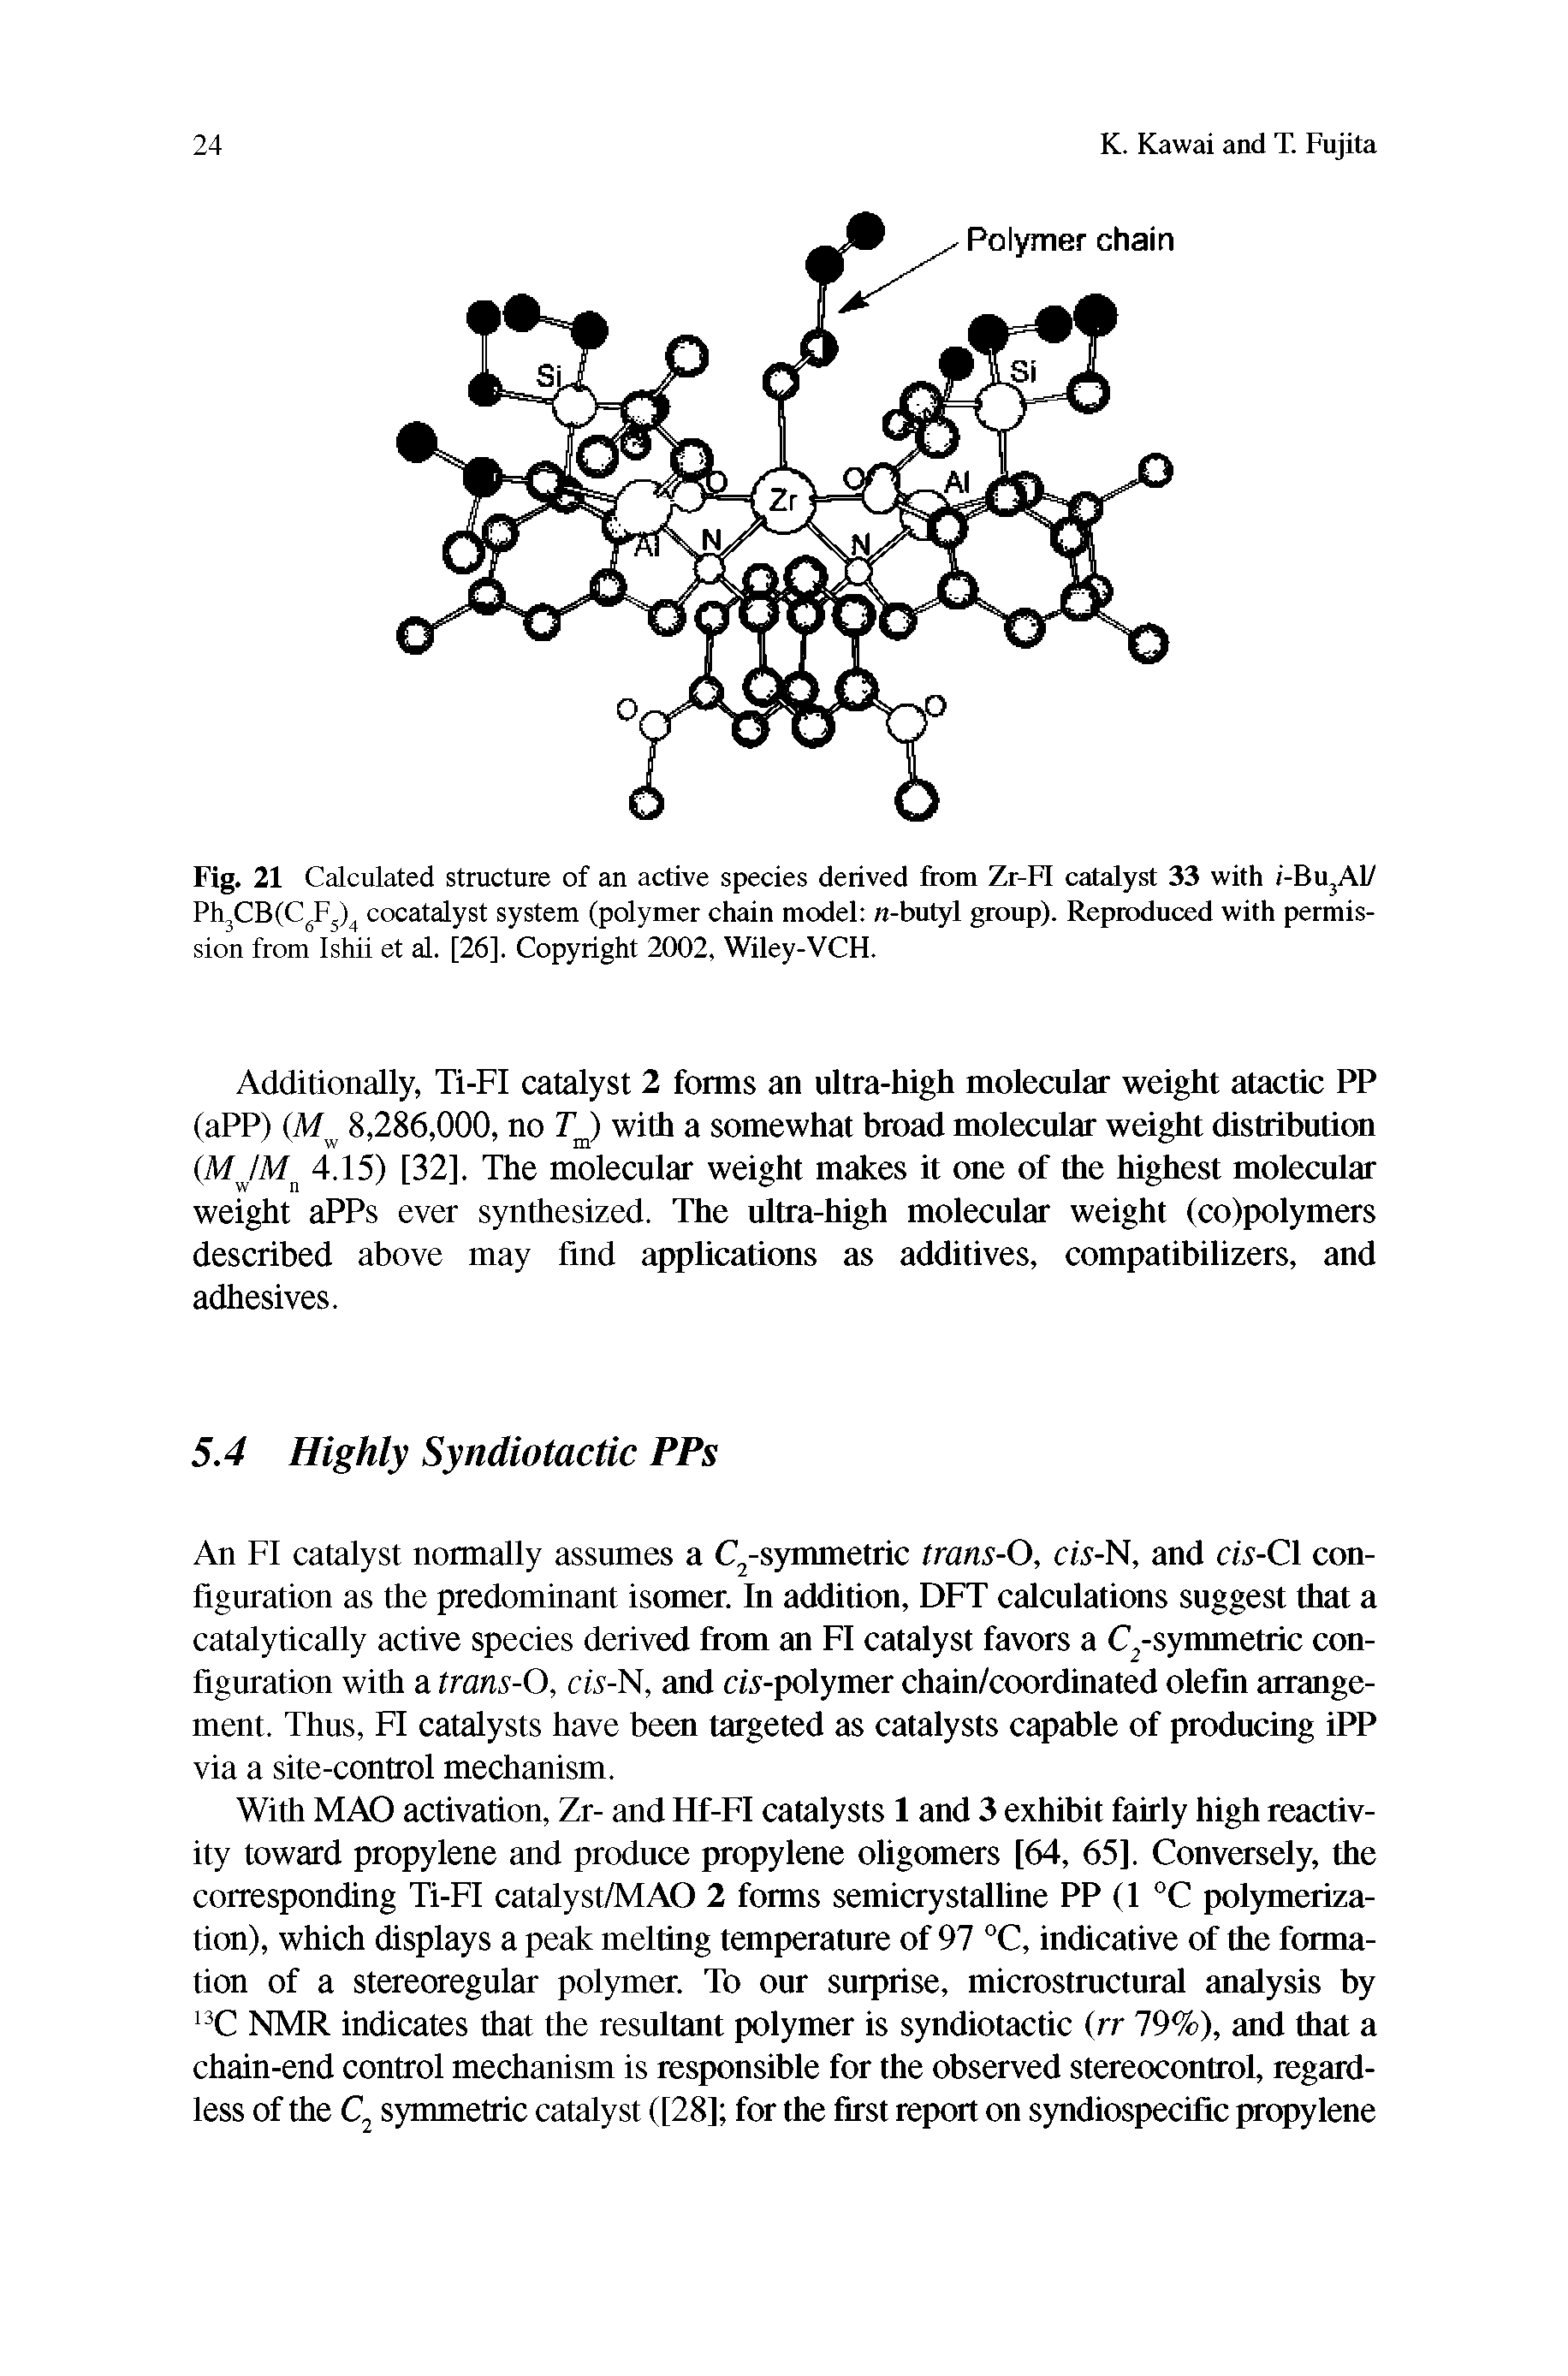 Fig. 21 Calculated structure of an active species derived from Zr-FI catalyst 33 with /-Bu,Al/ Ph CBtCy j, cocatalyst system (polymer chain model n-butyl group). Reproduced with permission from Ishii et al. [26], Copyright 2002, Wiley-VCH.